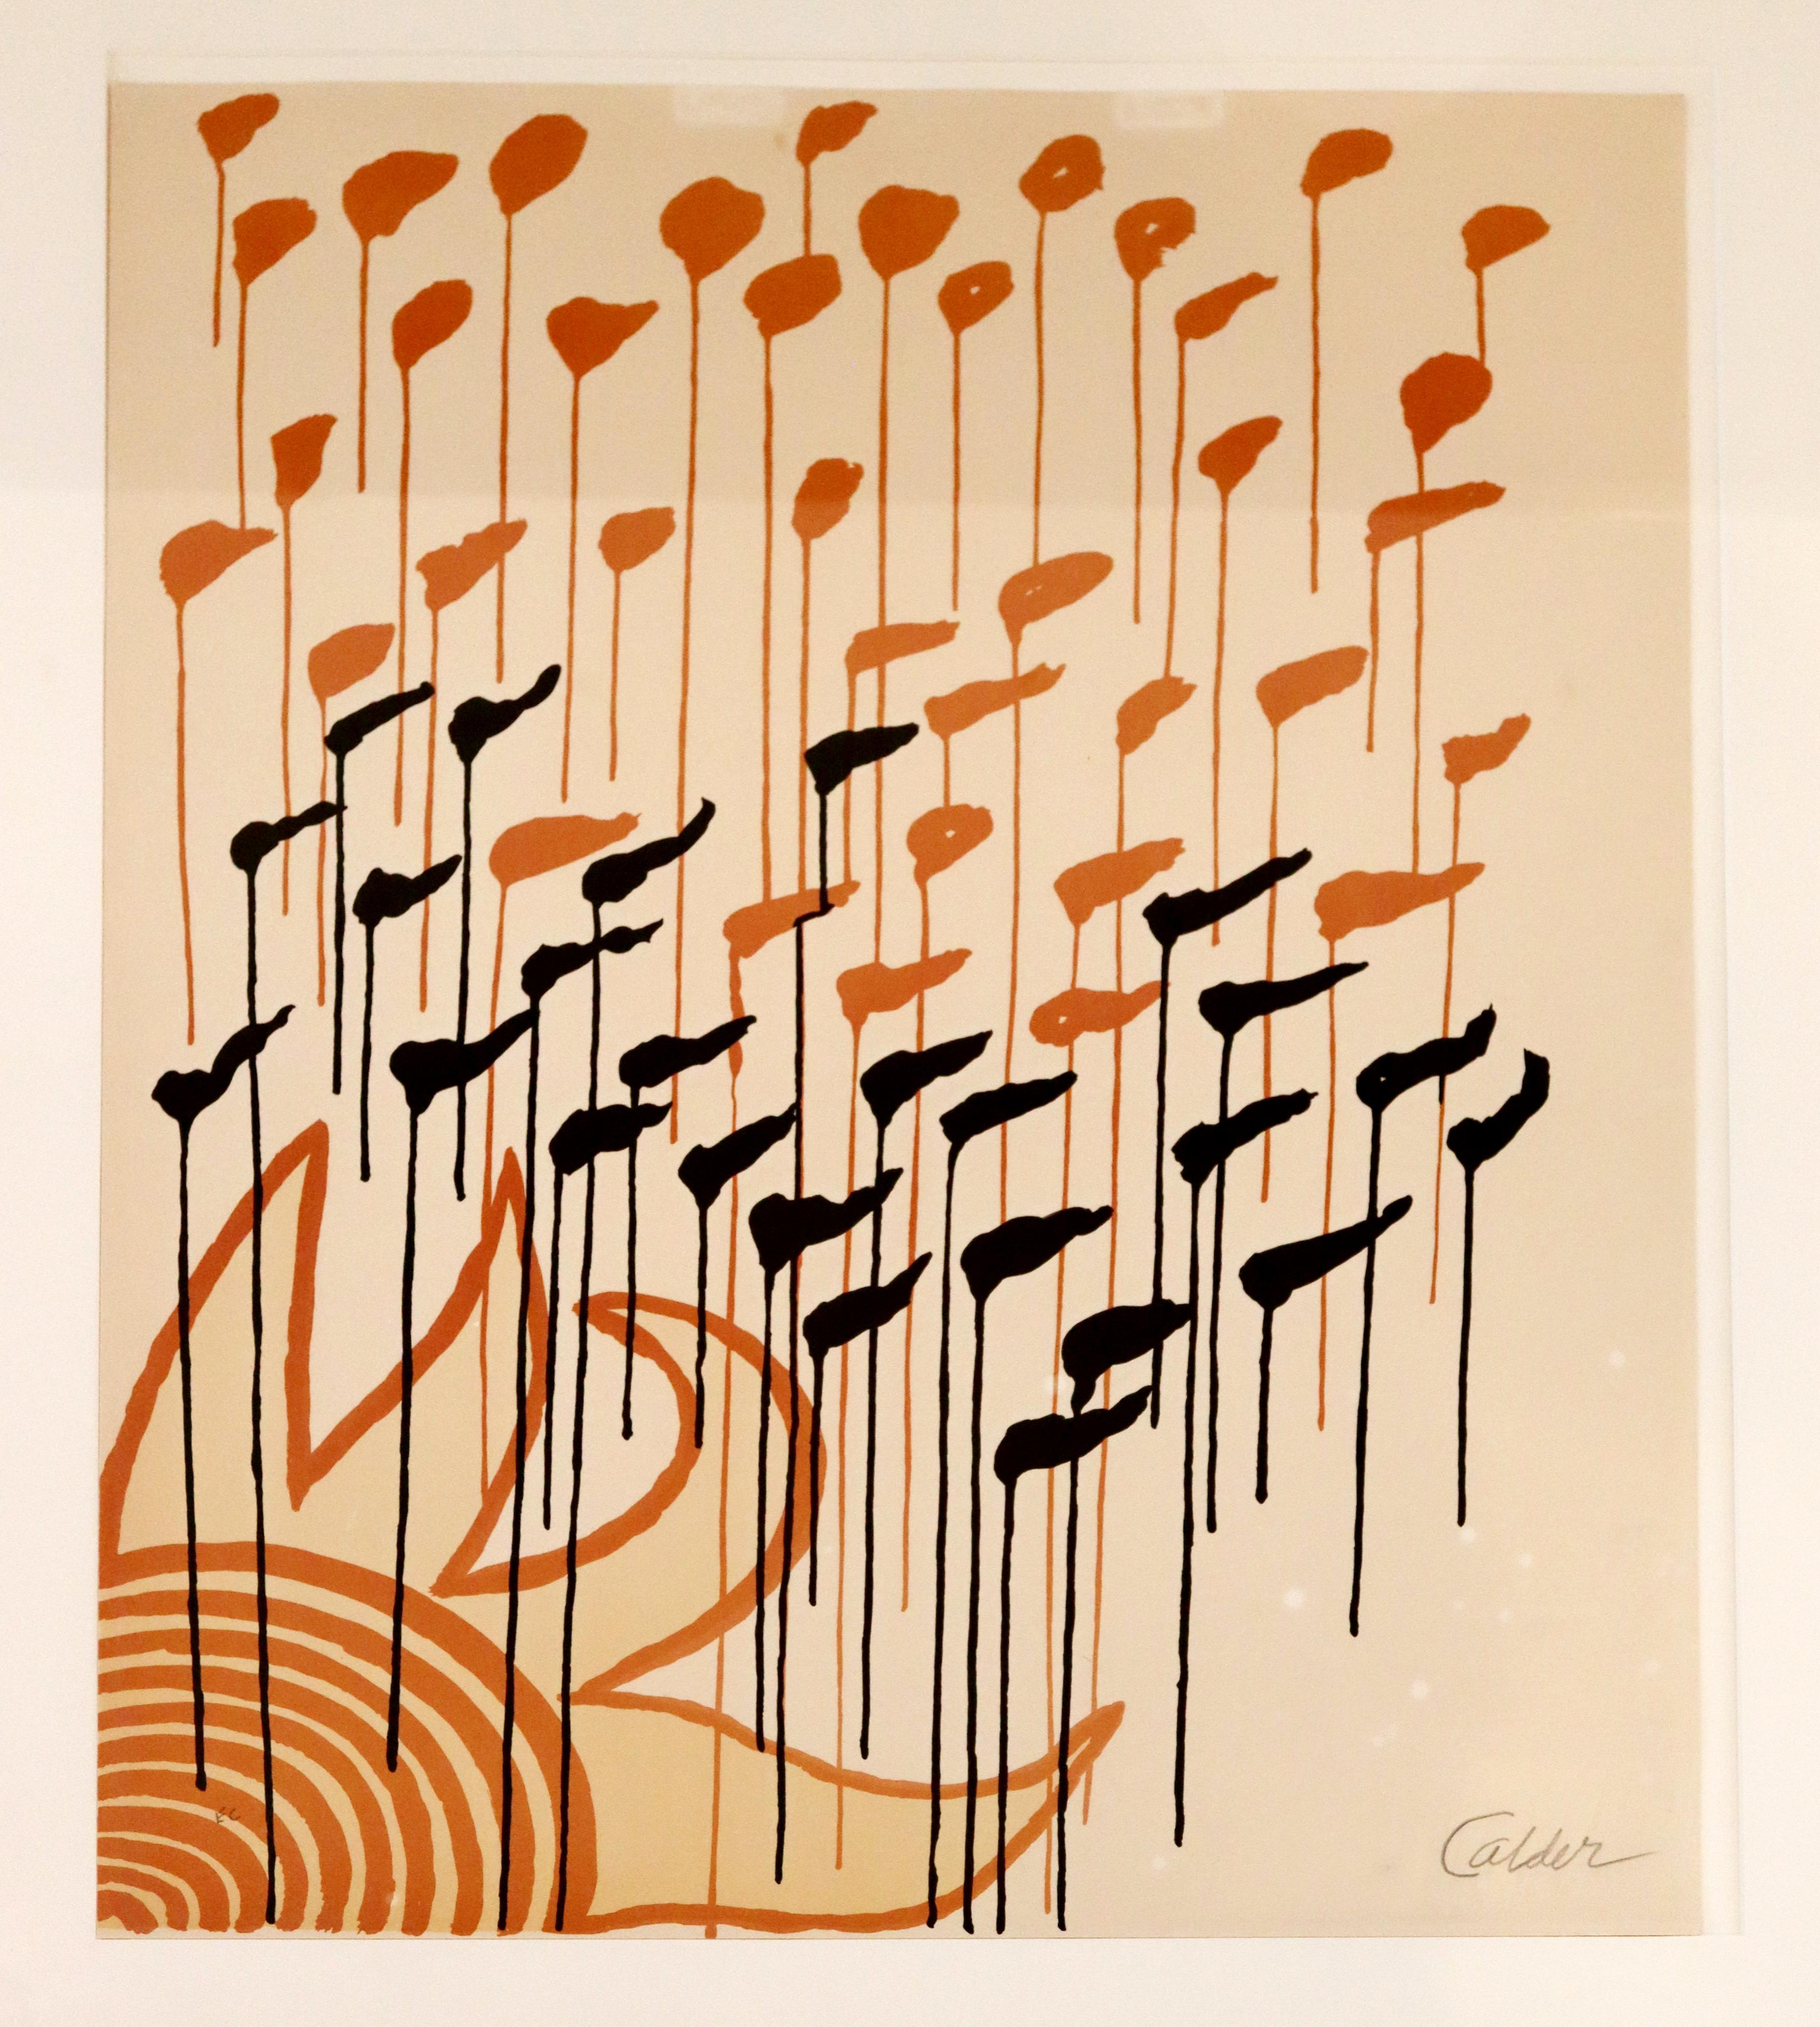 For your consideration is an entrancing, framed, E.C. lithograph, pencil signed by Alexander Calder. Series Magie Eolienne. In excellent condition, except for two marks of tape damage at the top. Matting will cover it. The dimensions of the frame